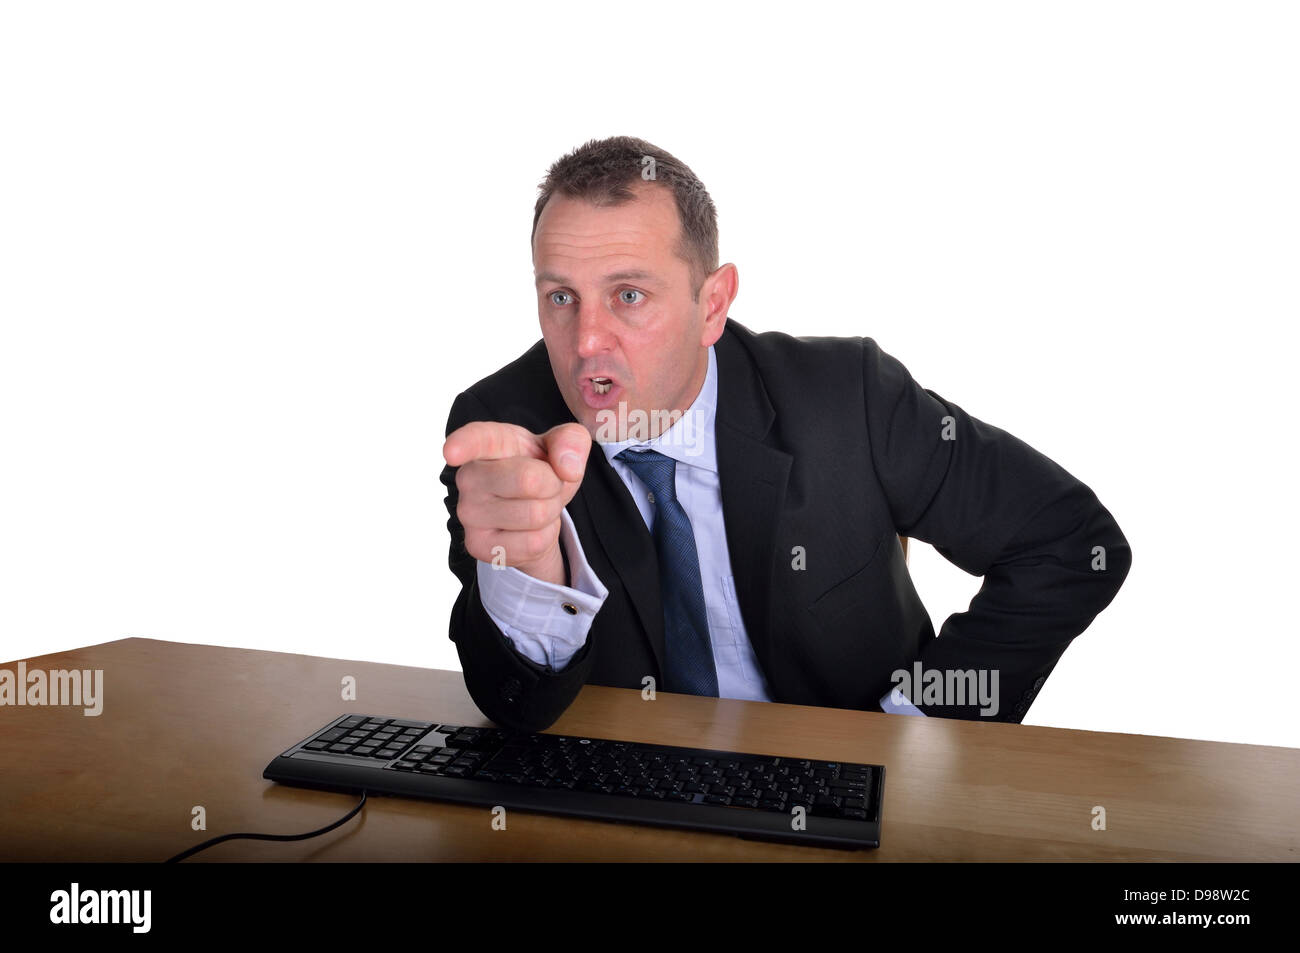 Image of a businessman pointing across a desk Stock Photo